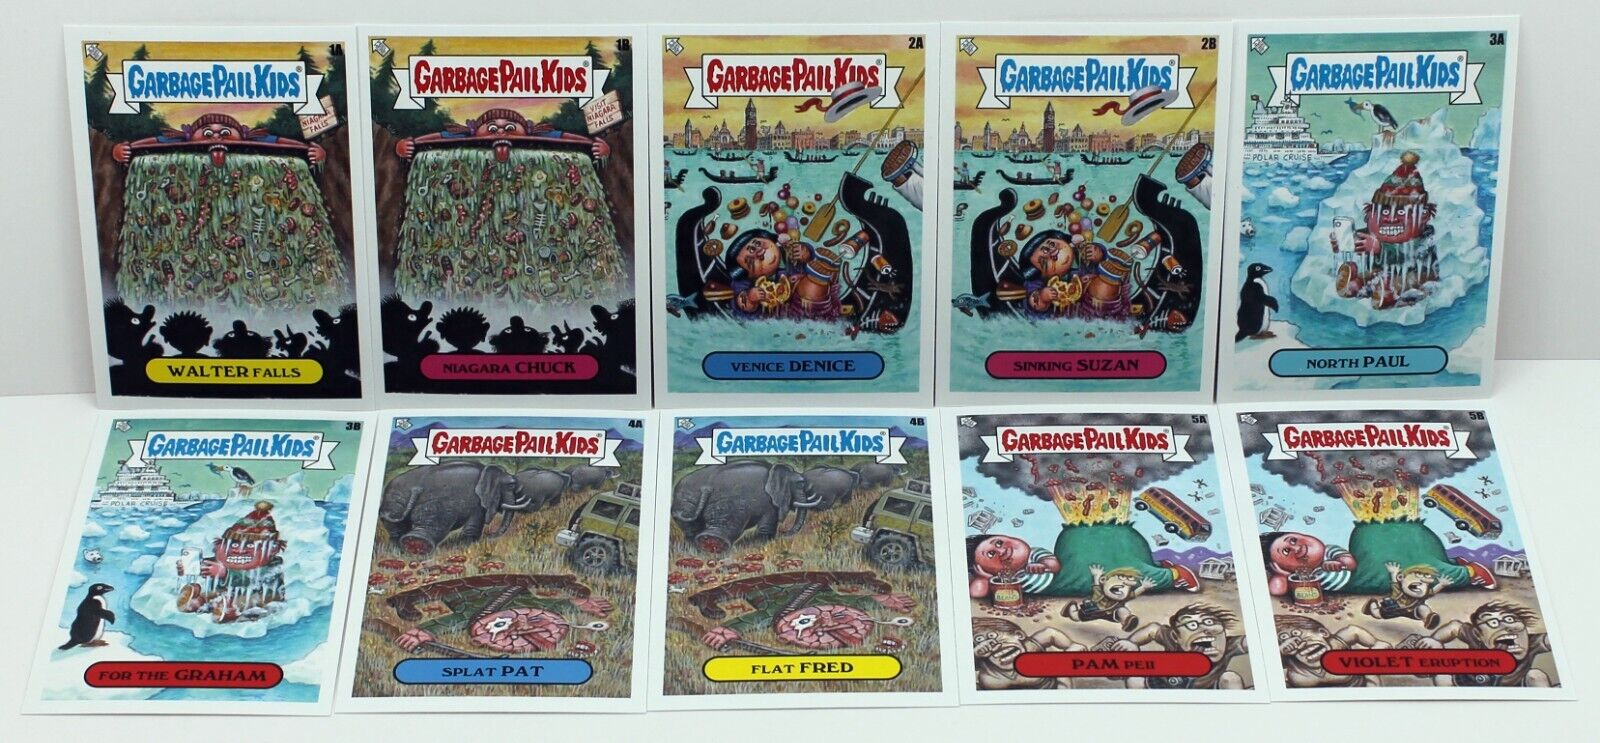 2023 Garbage Pail Kids Goes On Vacation 10-Card Famous Landmarks by Tom Bunk Set